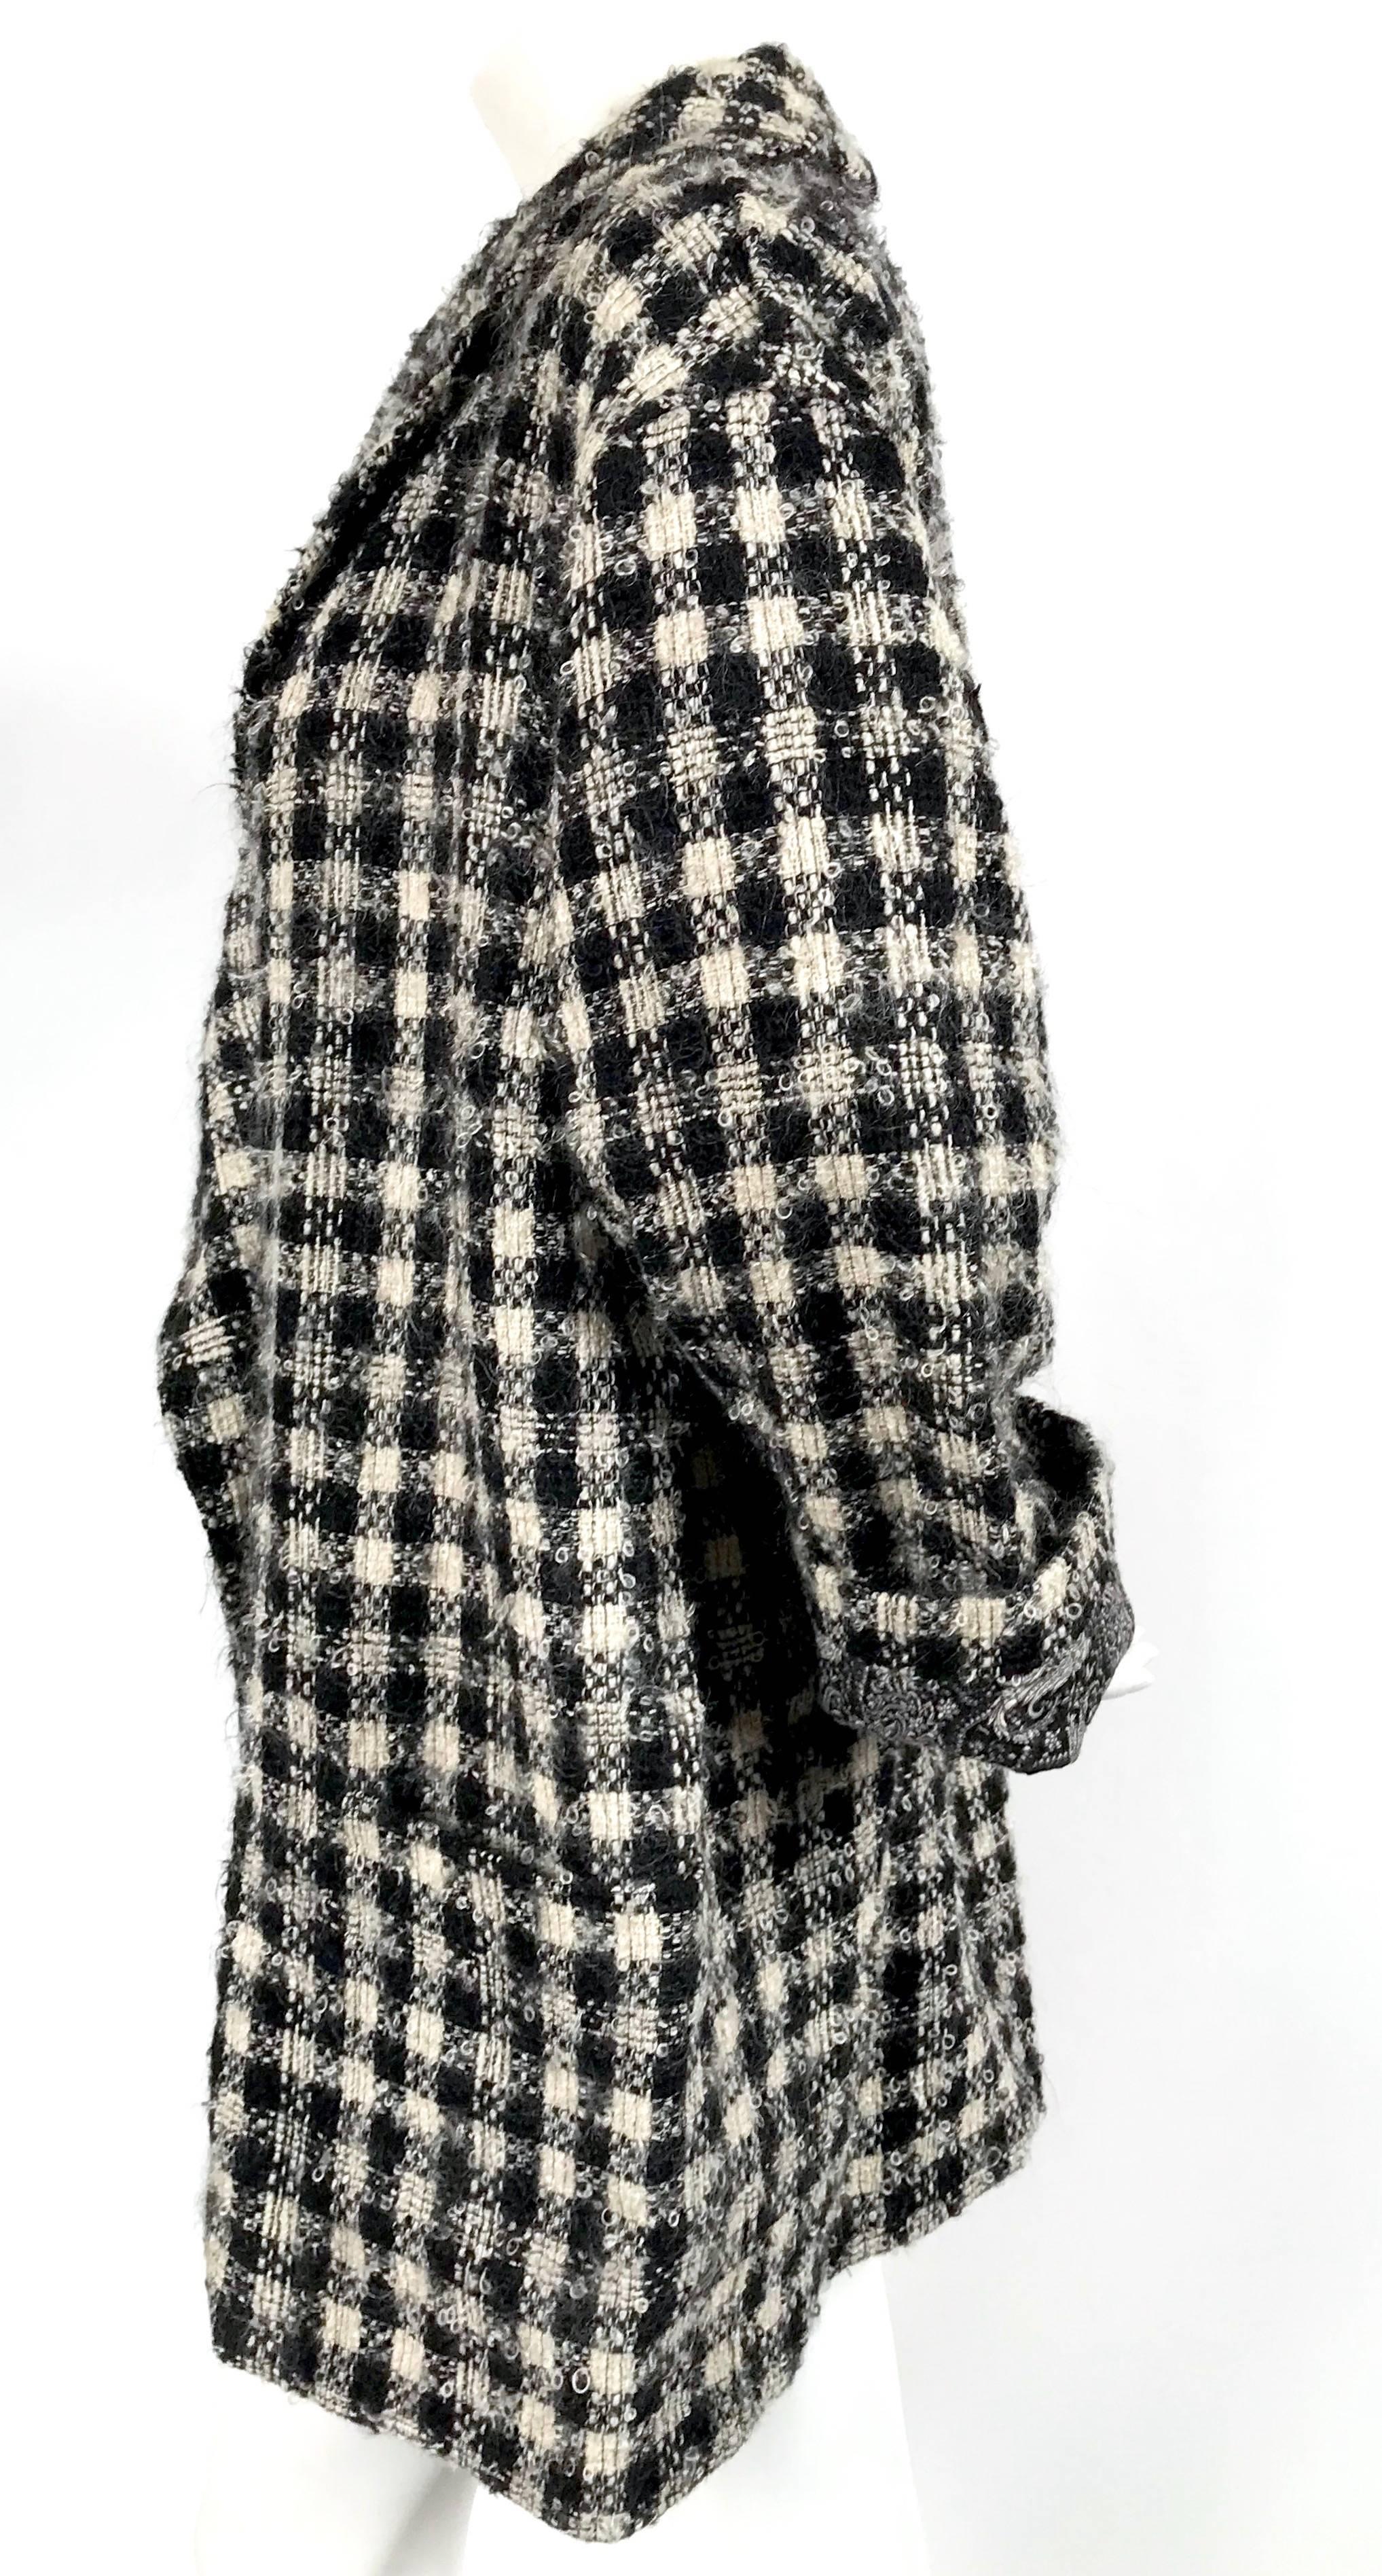 Black 1980's EMANUEL UNGARO PARALLELE houndstooth mohair coat with paisley lining